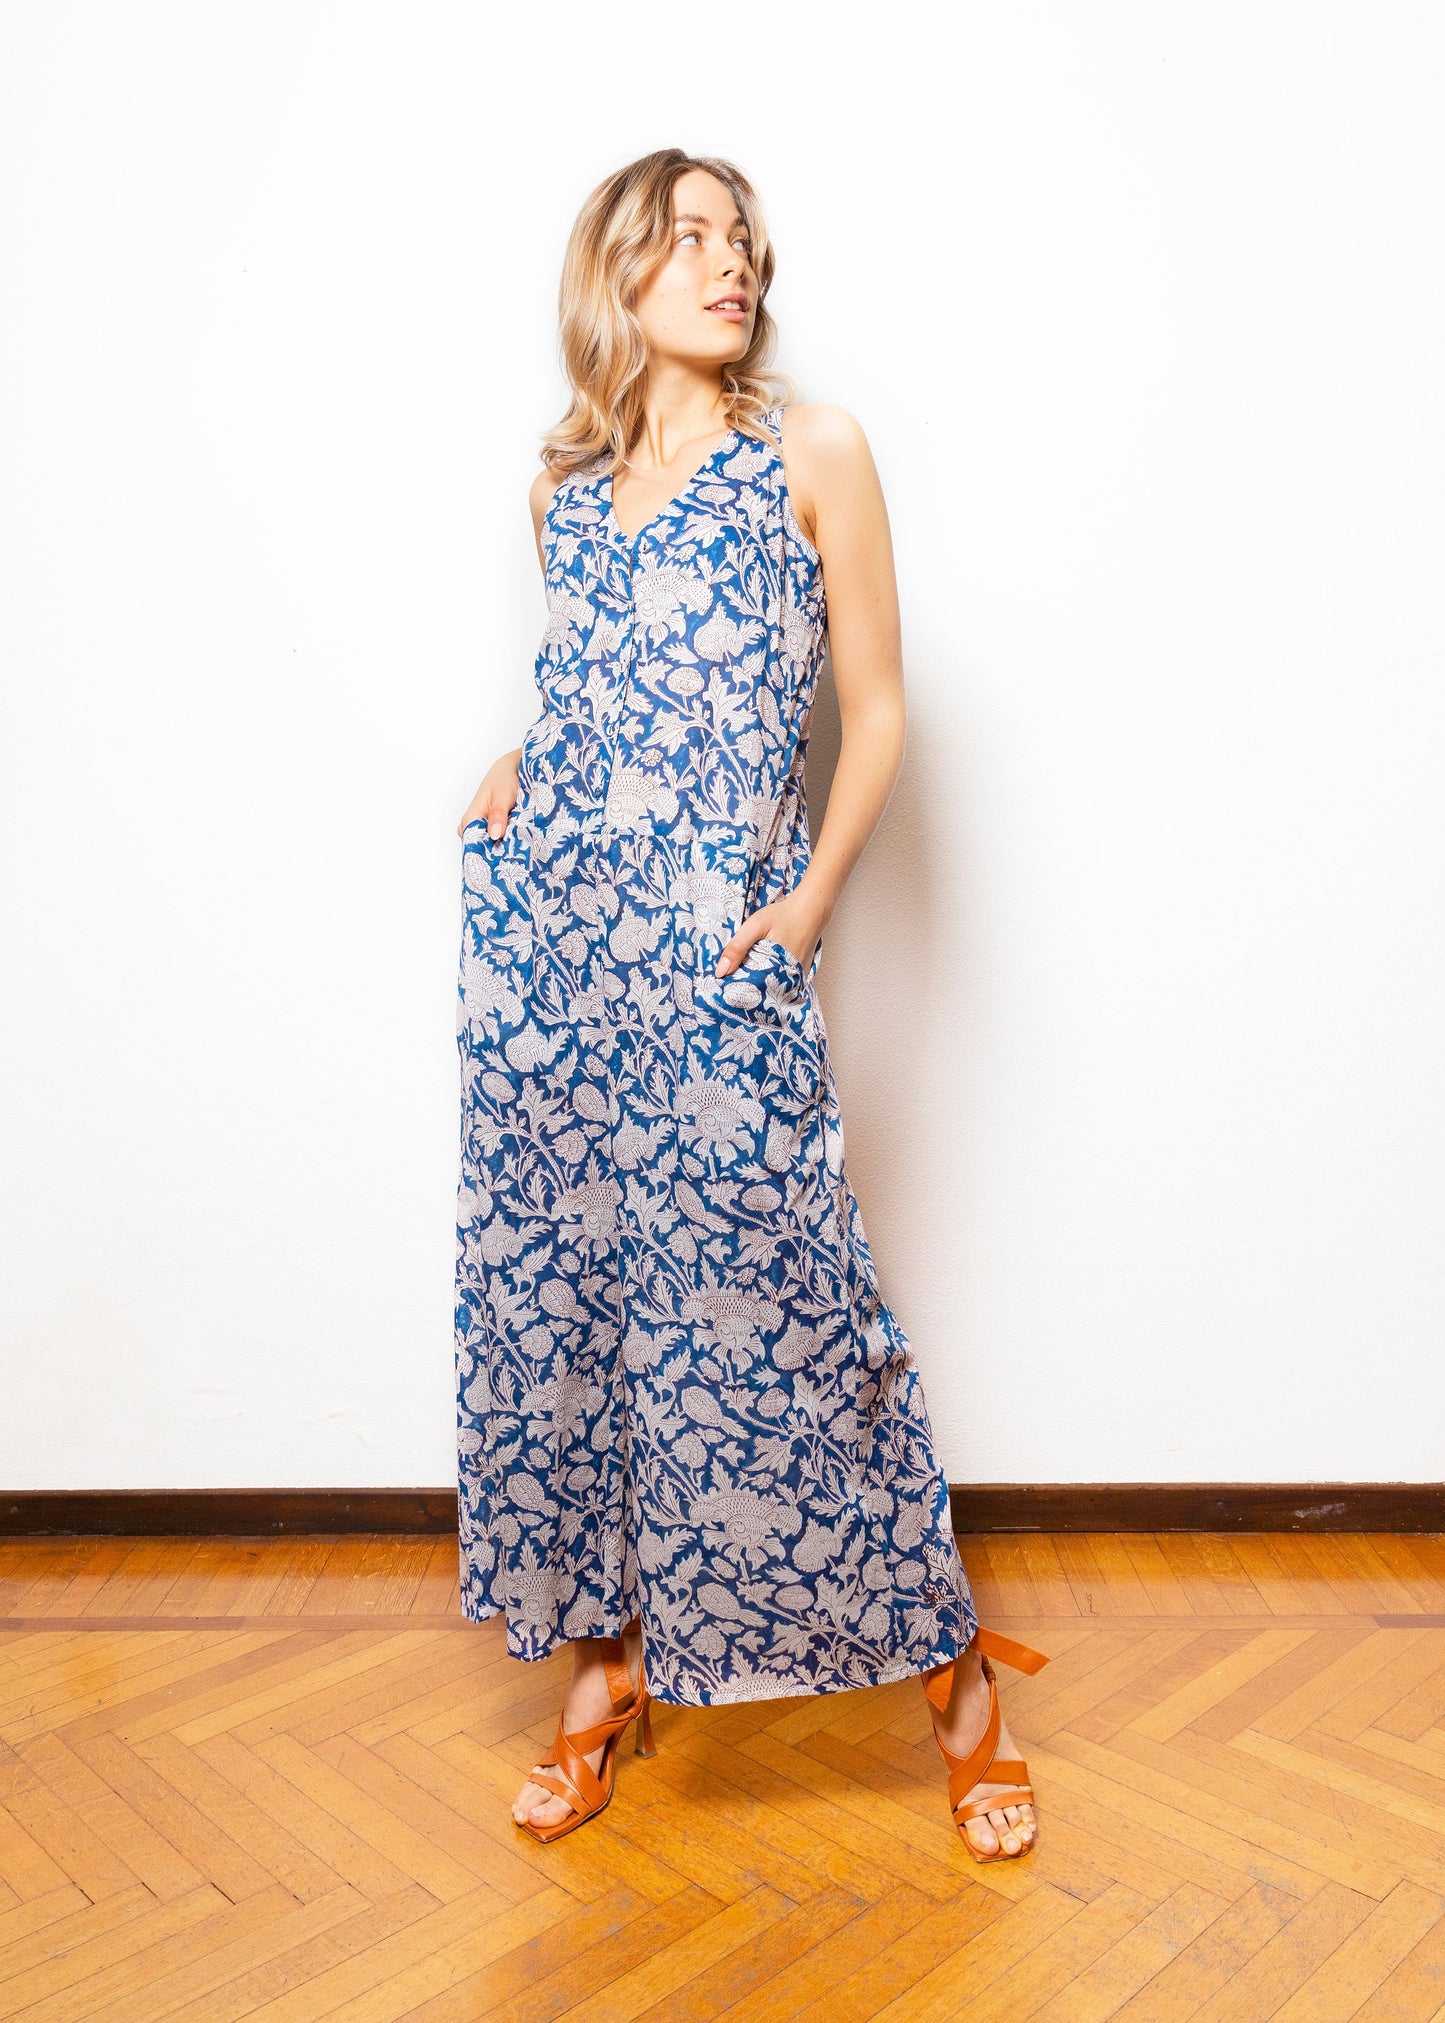 Blue and white sleeveless cotton jumpsuit dress with floral print - NAKSH007